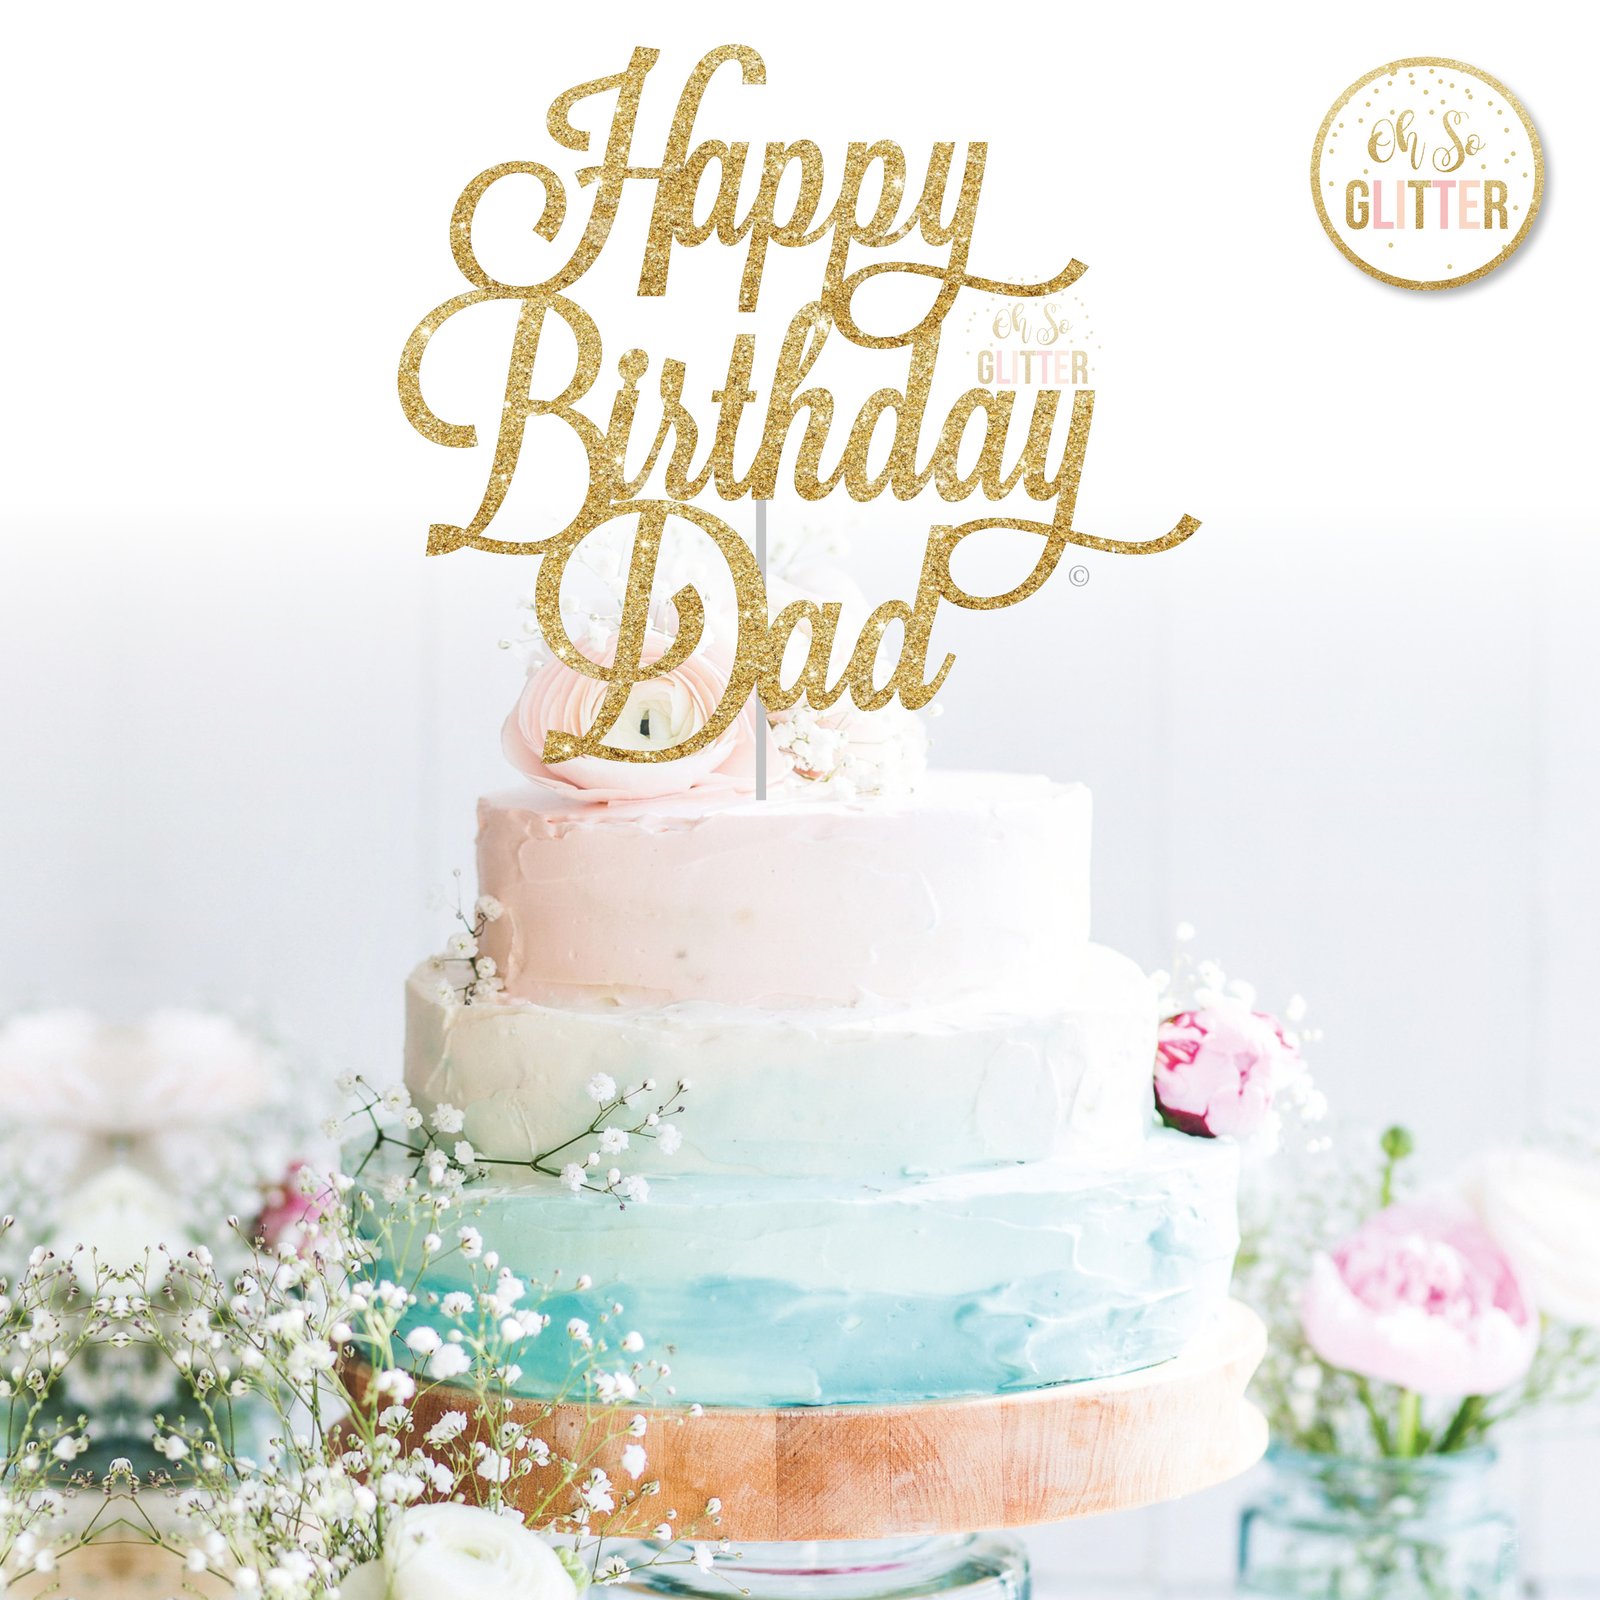 Awesome Dad Birthday Cake | Same-day Delivery | Gurgaon Bakers